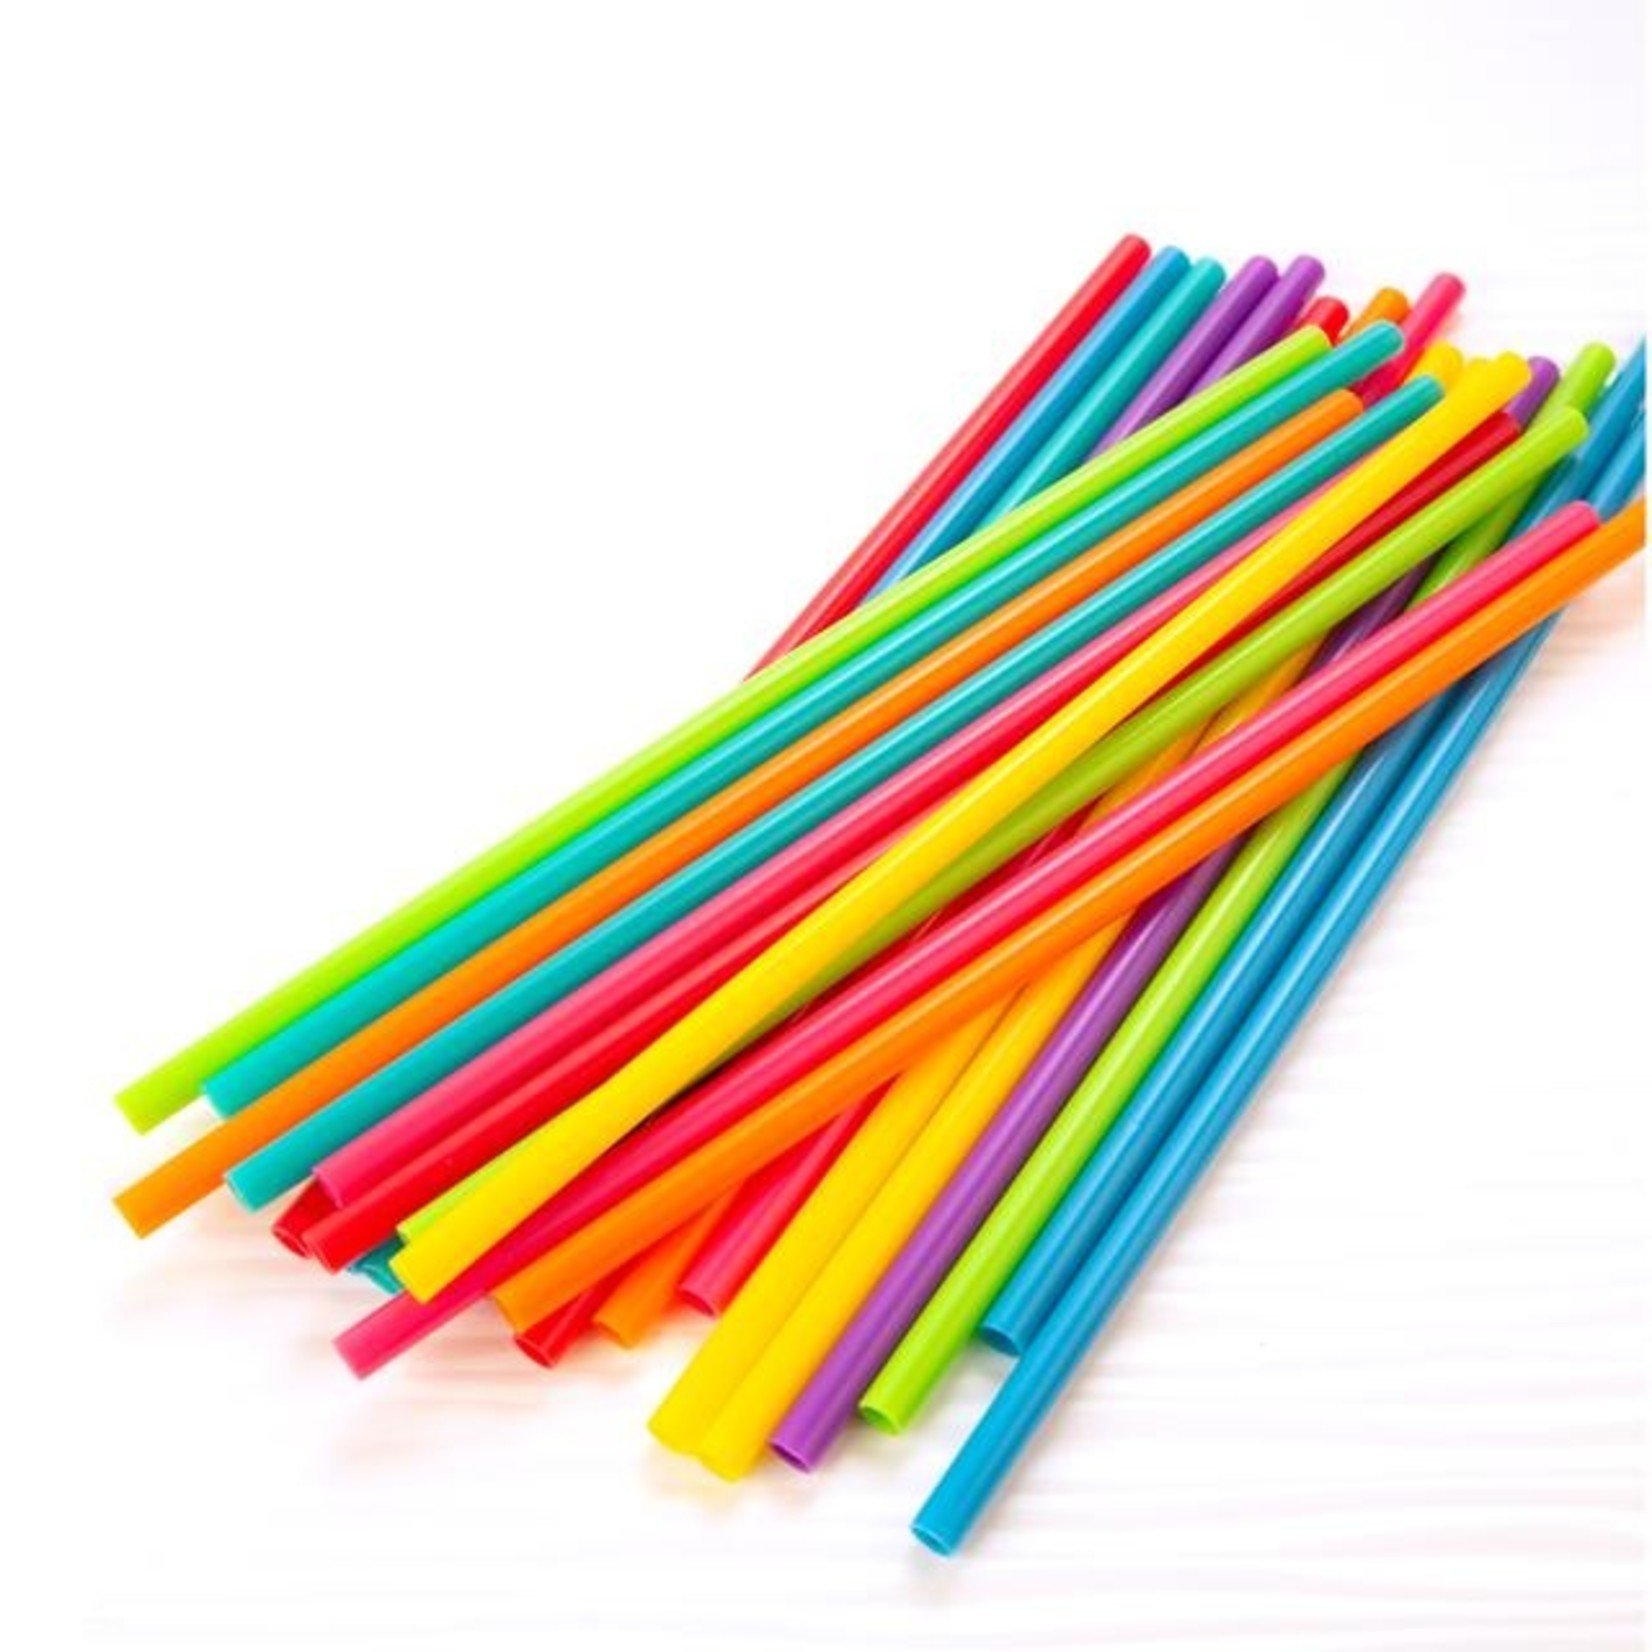 11 Inch Long Flexible Pink Reusable Straws with White Straw Caps